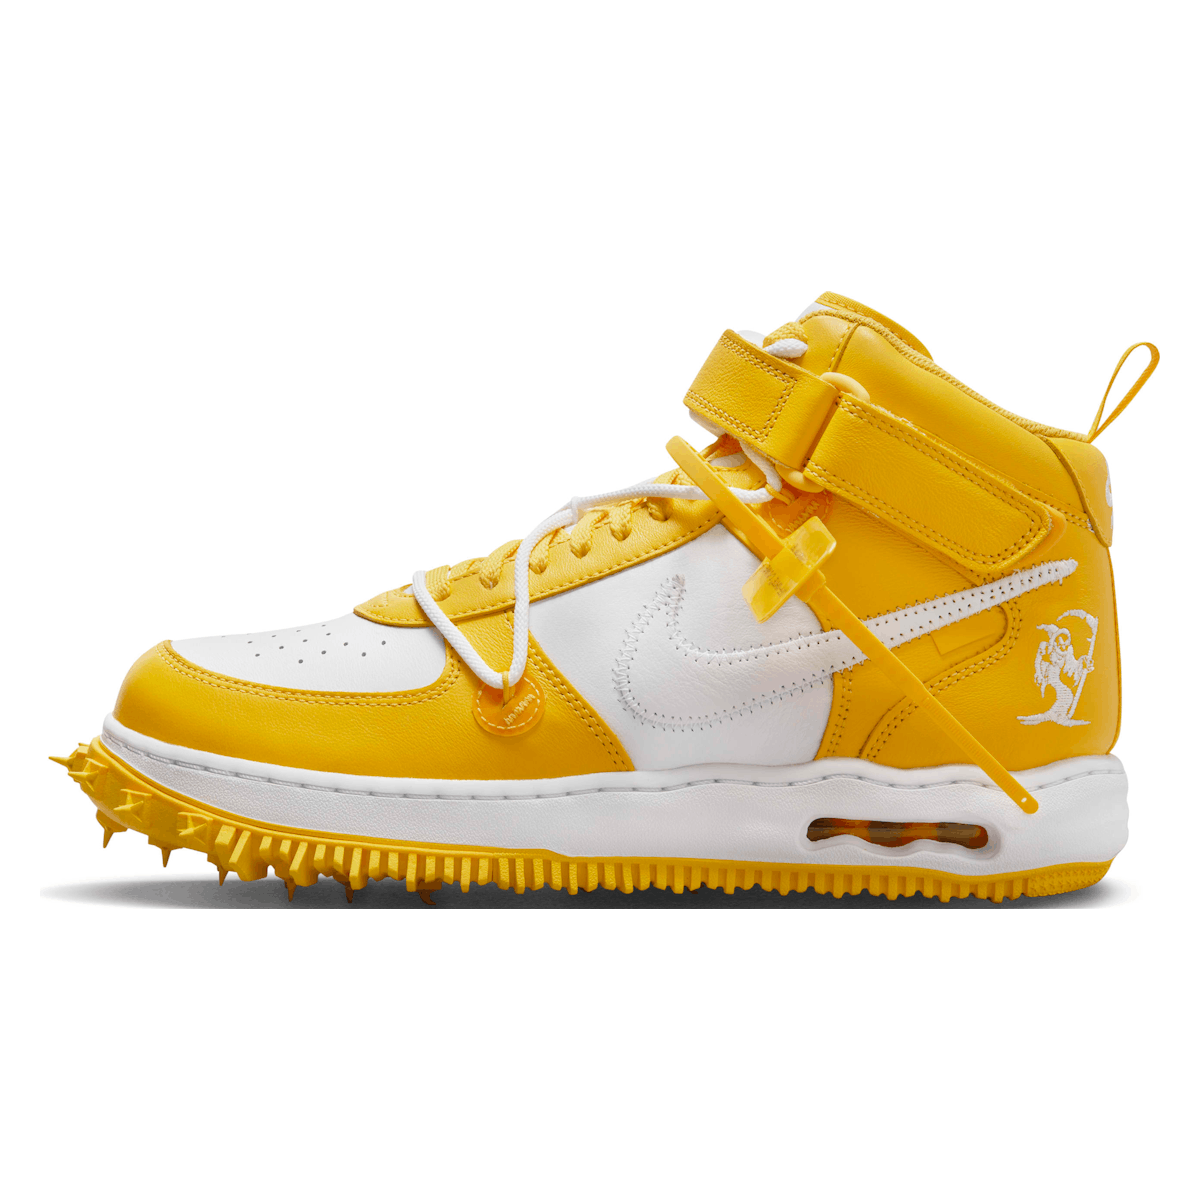 Off-White x Nike Air Force 1 Mid "Varsity Maize"